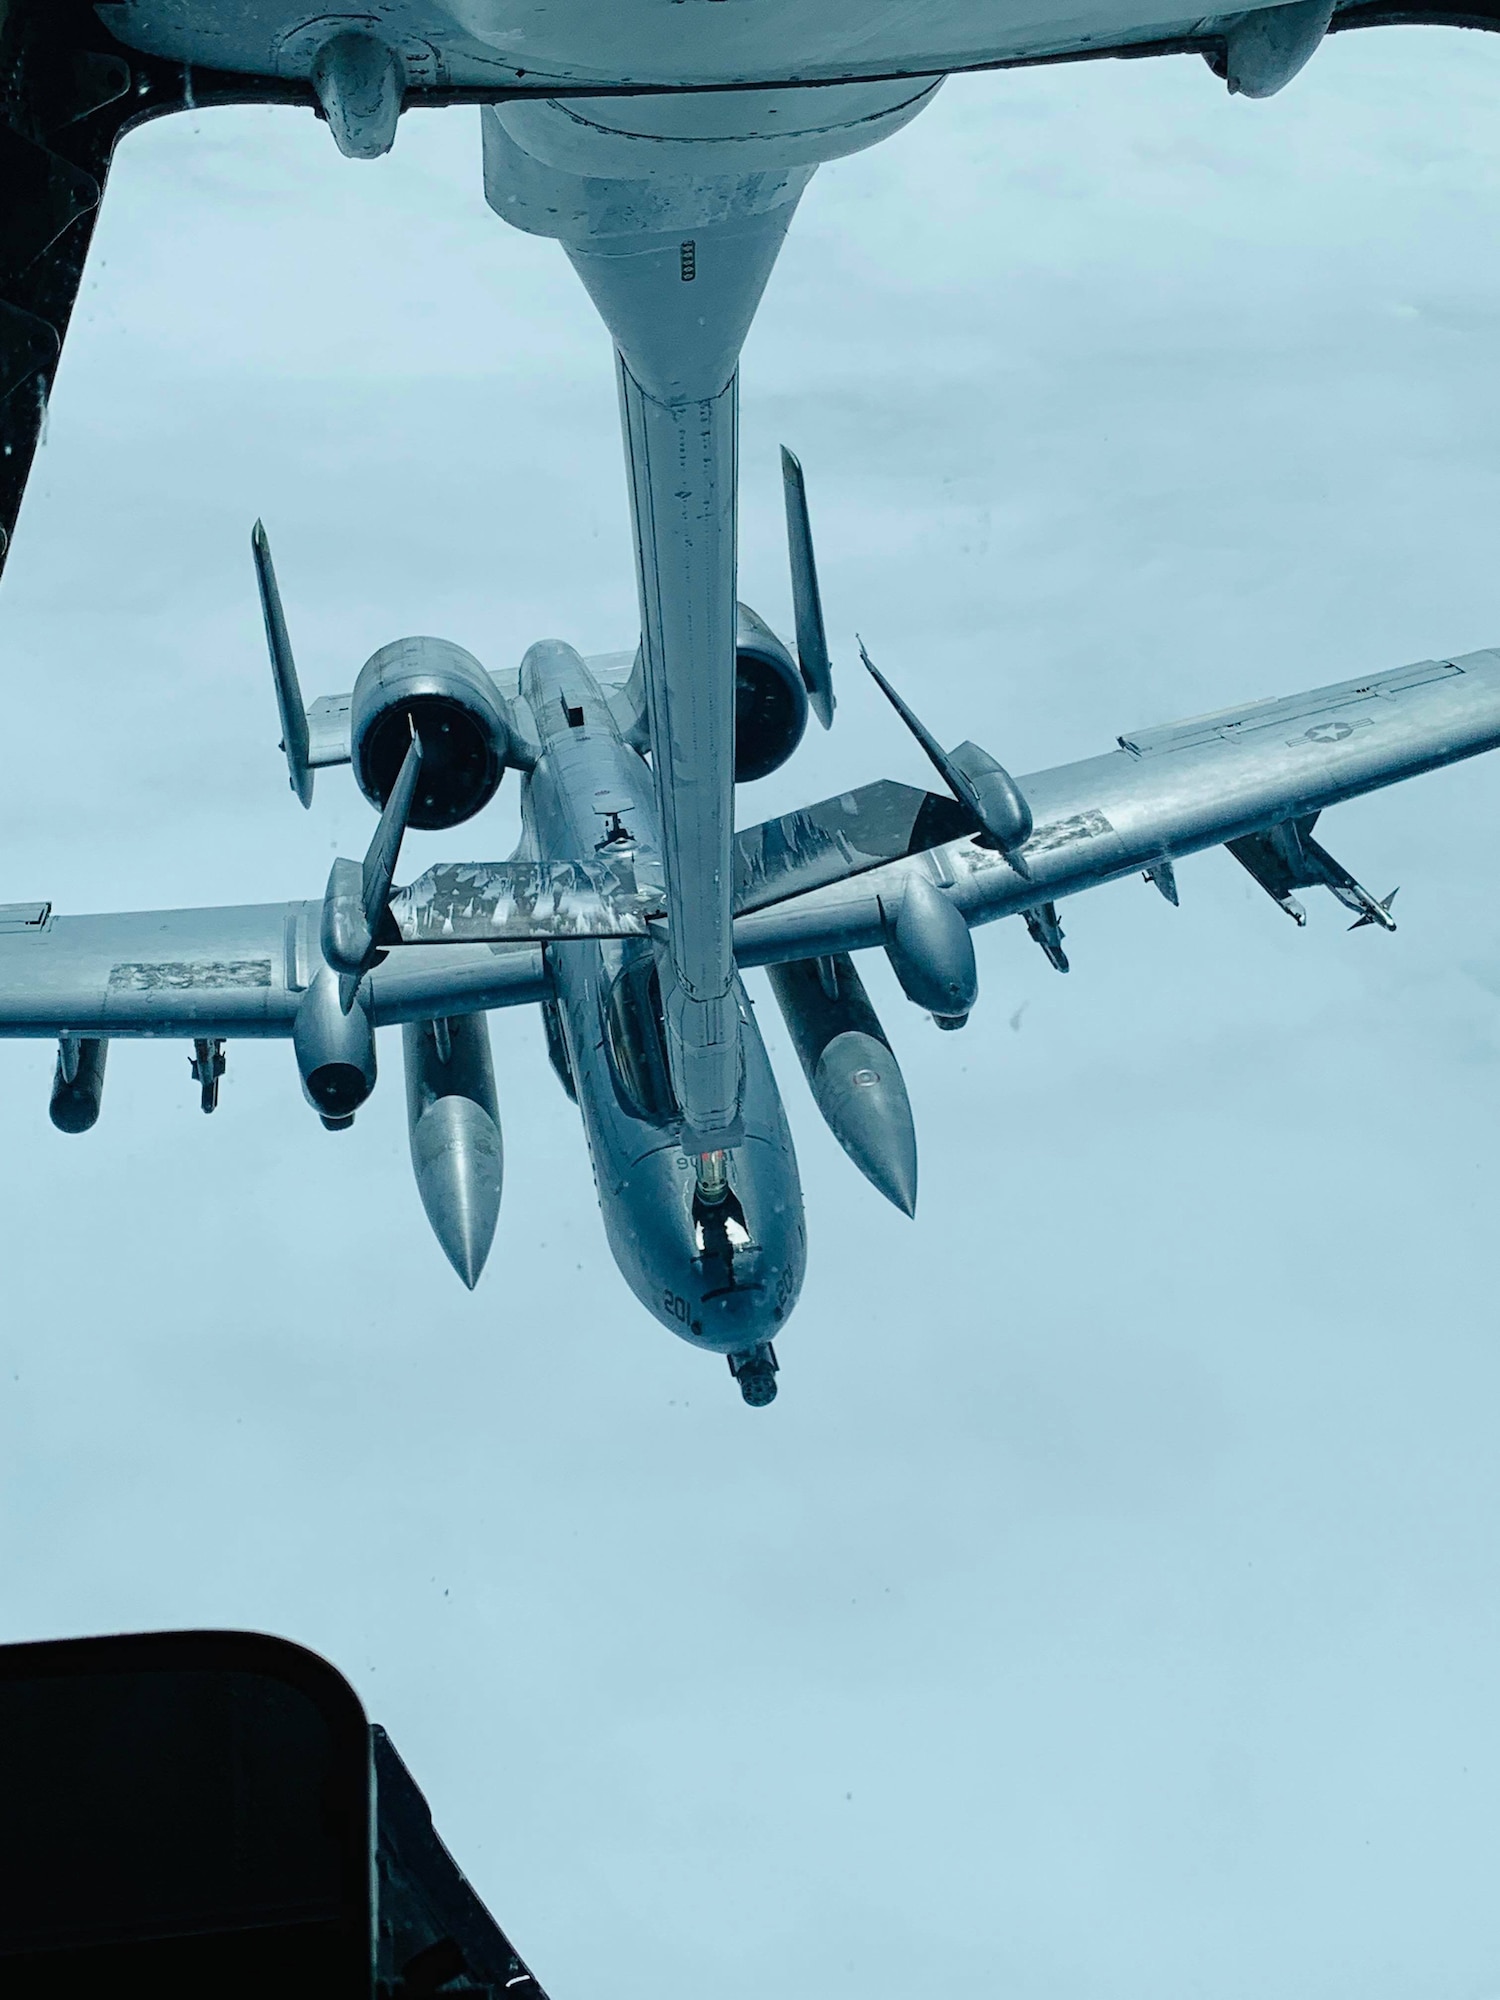 A U.S. Air Force A-10 Thunderbolt is refueled by a KC-10 Extender from Travis Air Force Base, California, over the Pacific Ocean. The Thunderbolt was on its way to participate in Red Flag Alaska 19-2, a large-scale exercise headquartered at Eielson Air Force Base, Alaska. The exercise began June 6 and is scheduled to continue through June 21. (U.S. Air Force courtesy photo)